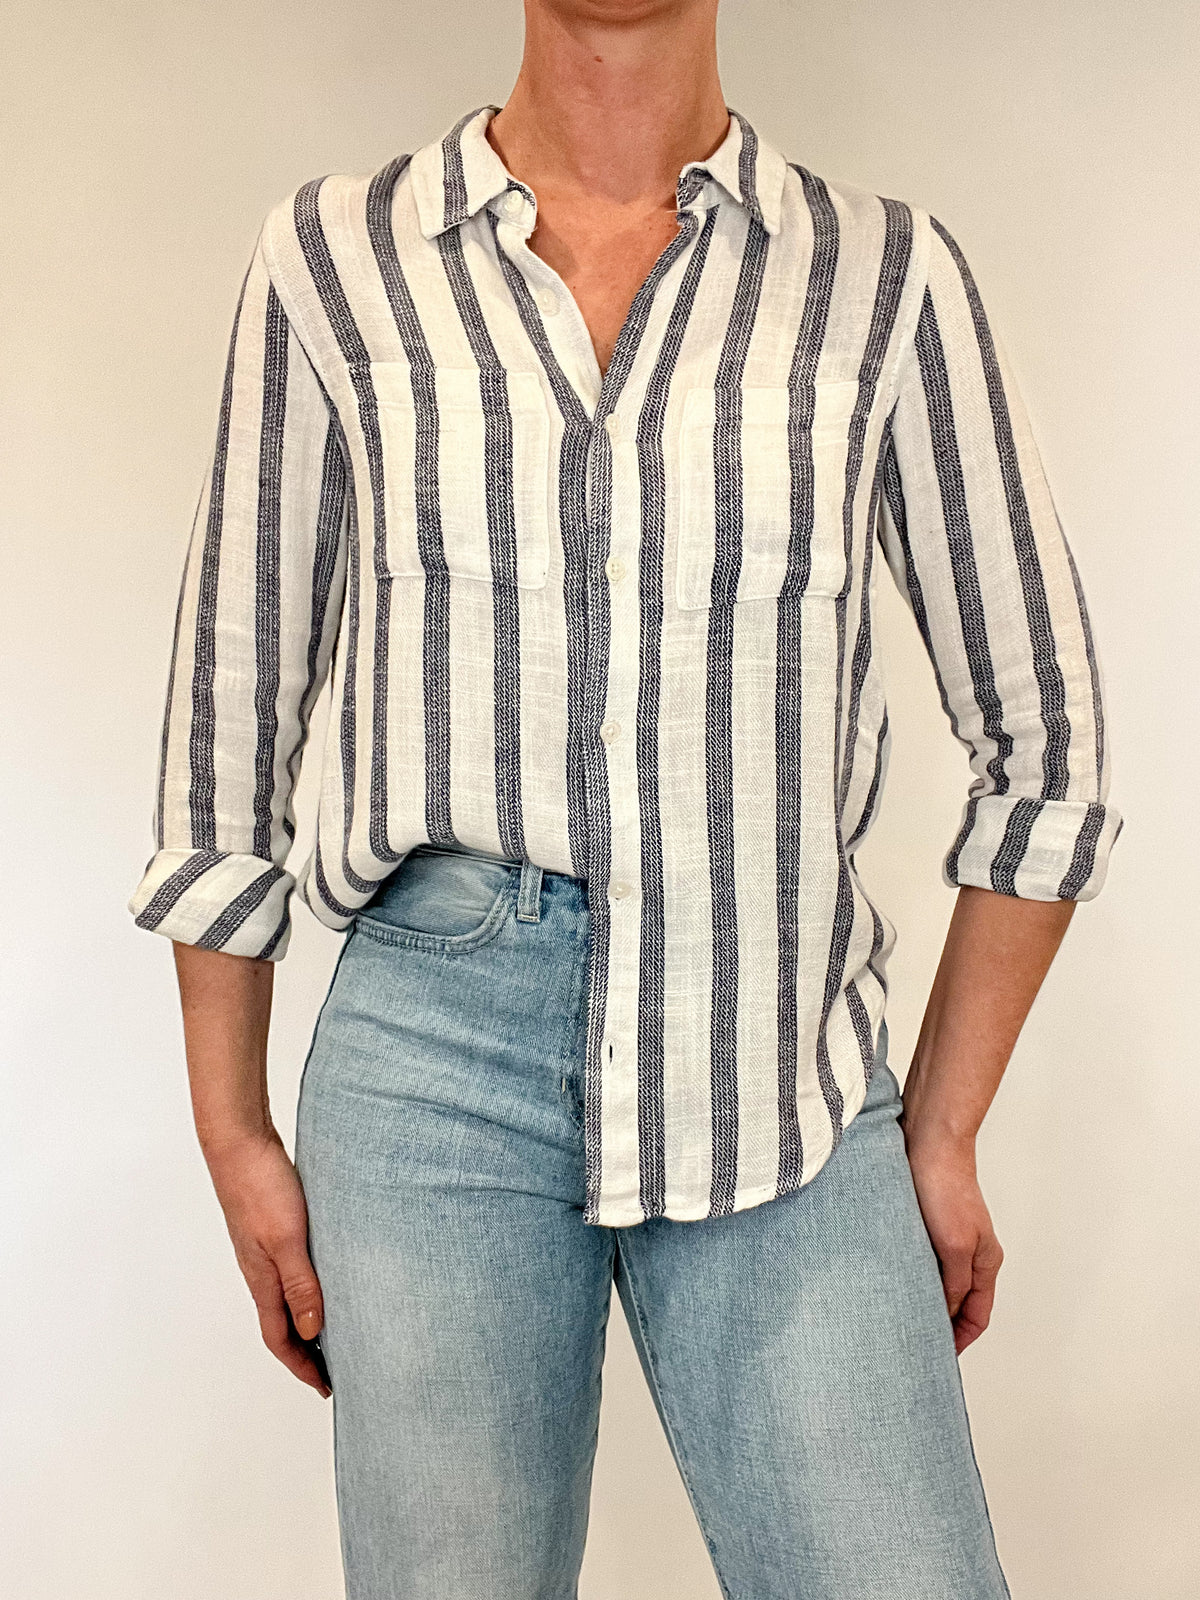 Introducing the Bestie Shirt in Blue, your new companion for the spring and summer season. Made with a luxurious linen blend, this stylish striped shirt is versatile enough to pair with any casual denim and sandals. Let it be your go-to piece for effortless fashion.